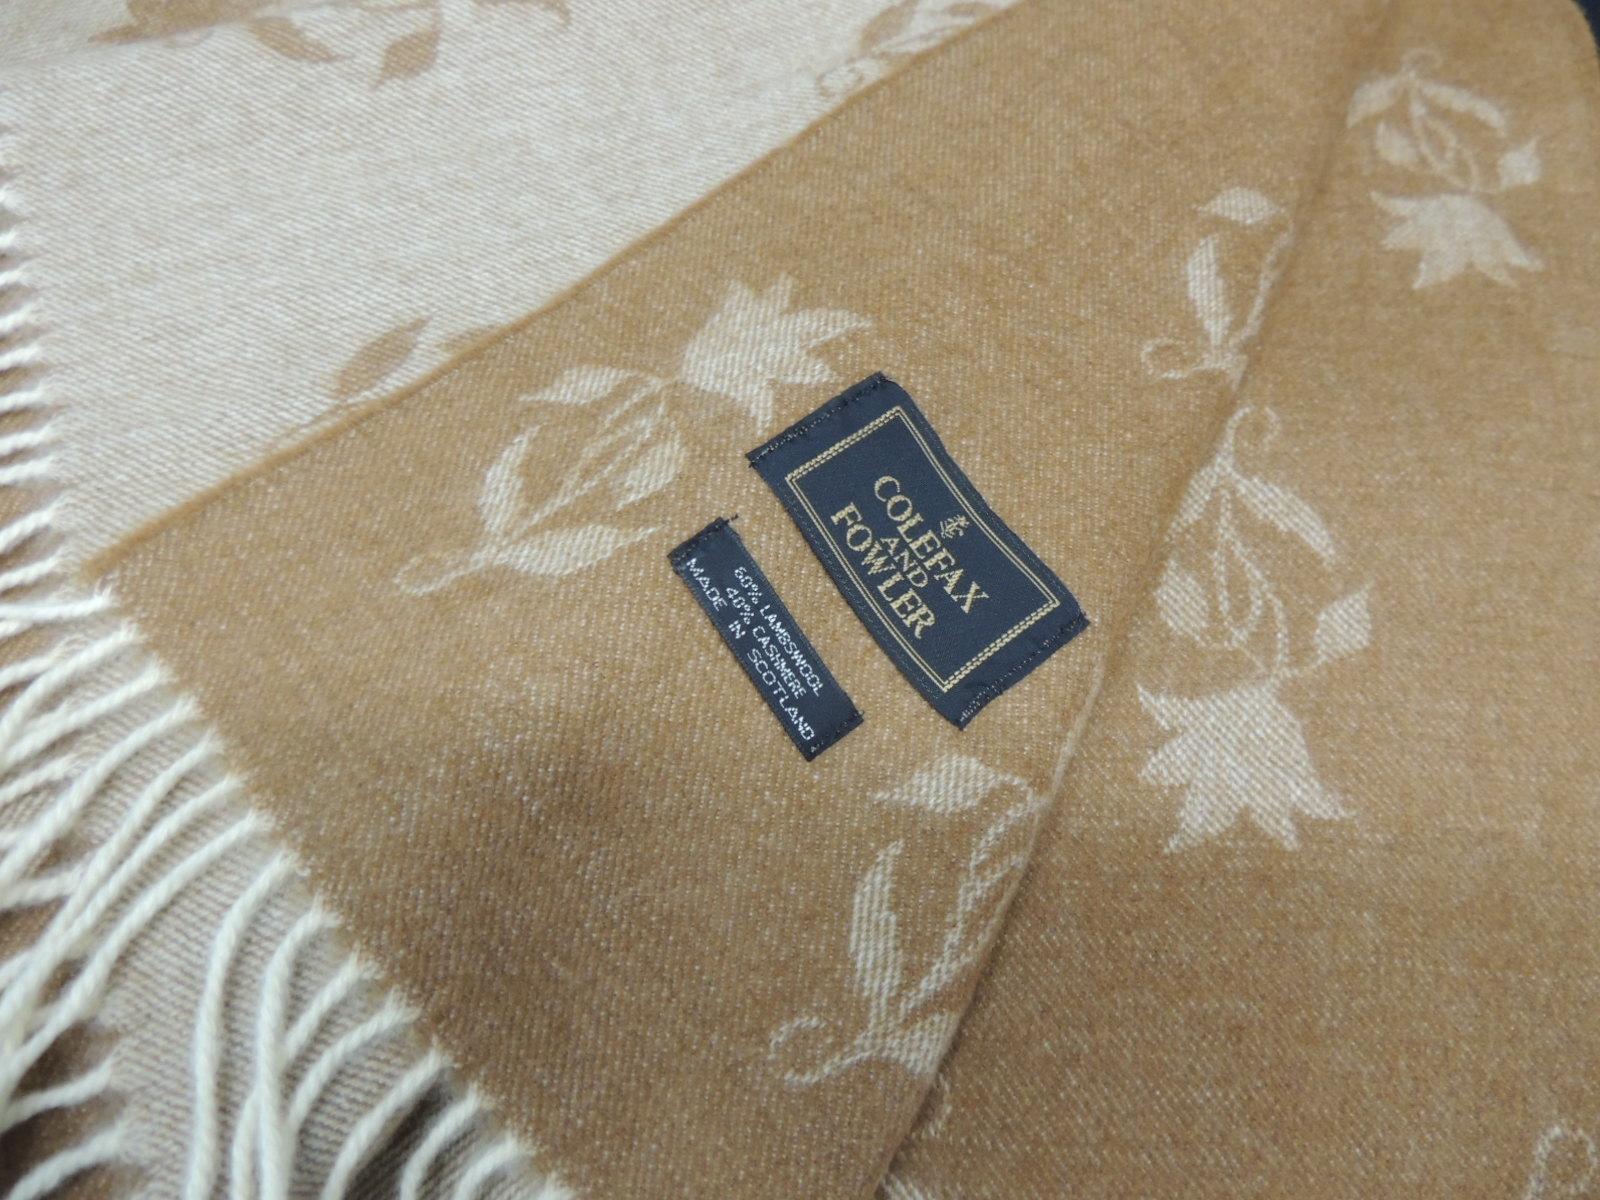 Colefax and fowler cashmere decorative throw.
Tone-on-tone camel and natural floral pattern.
Size: 53